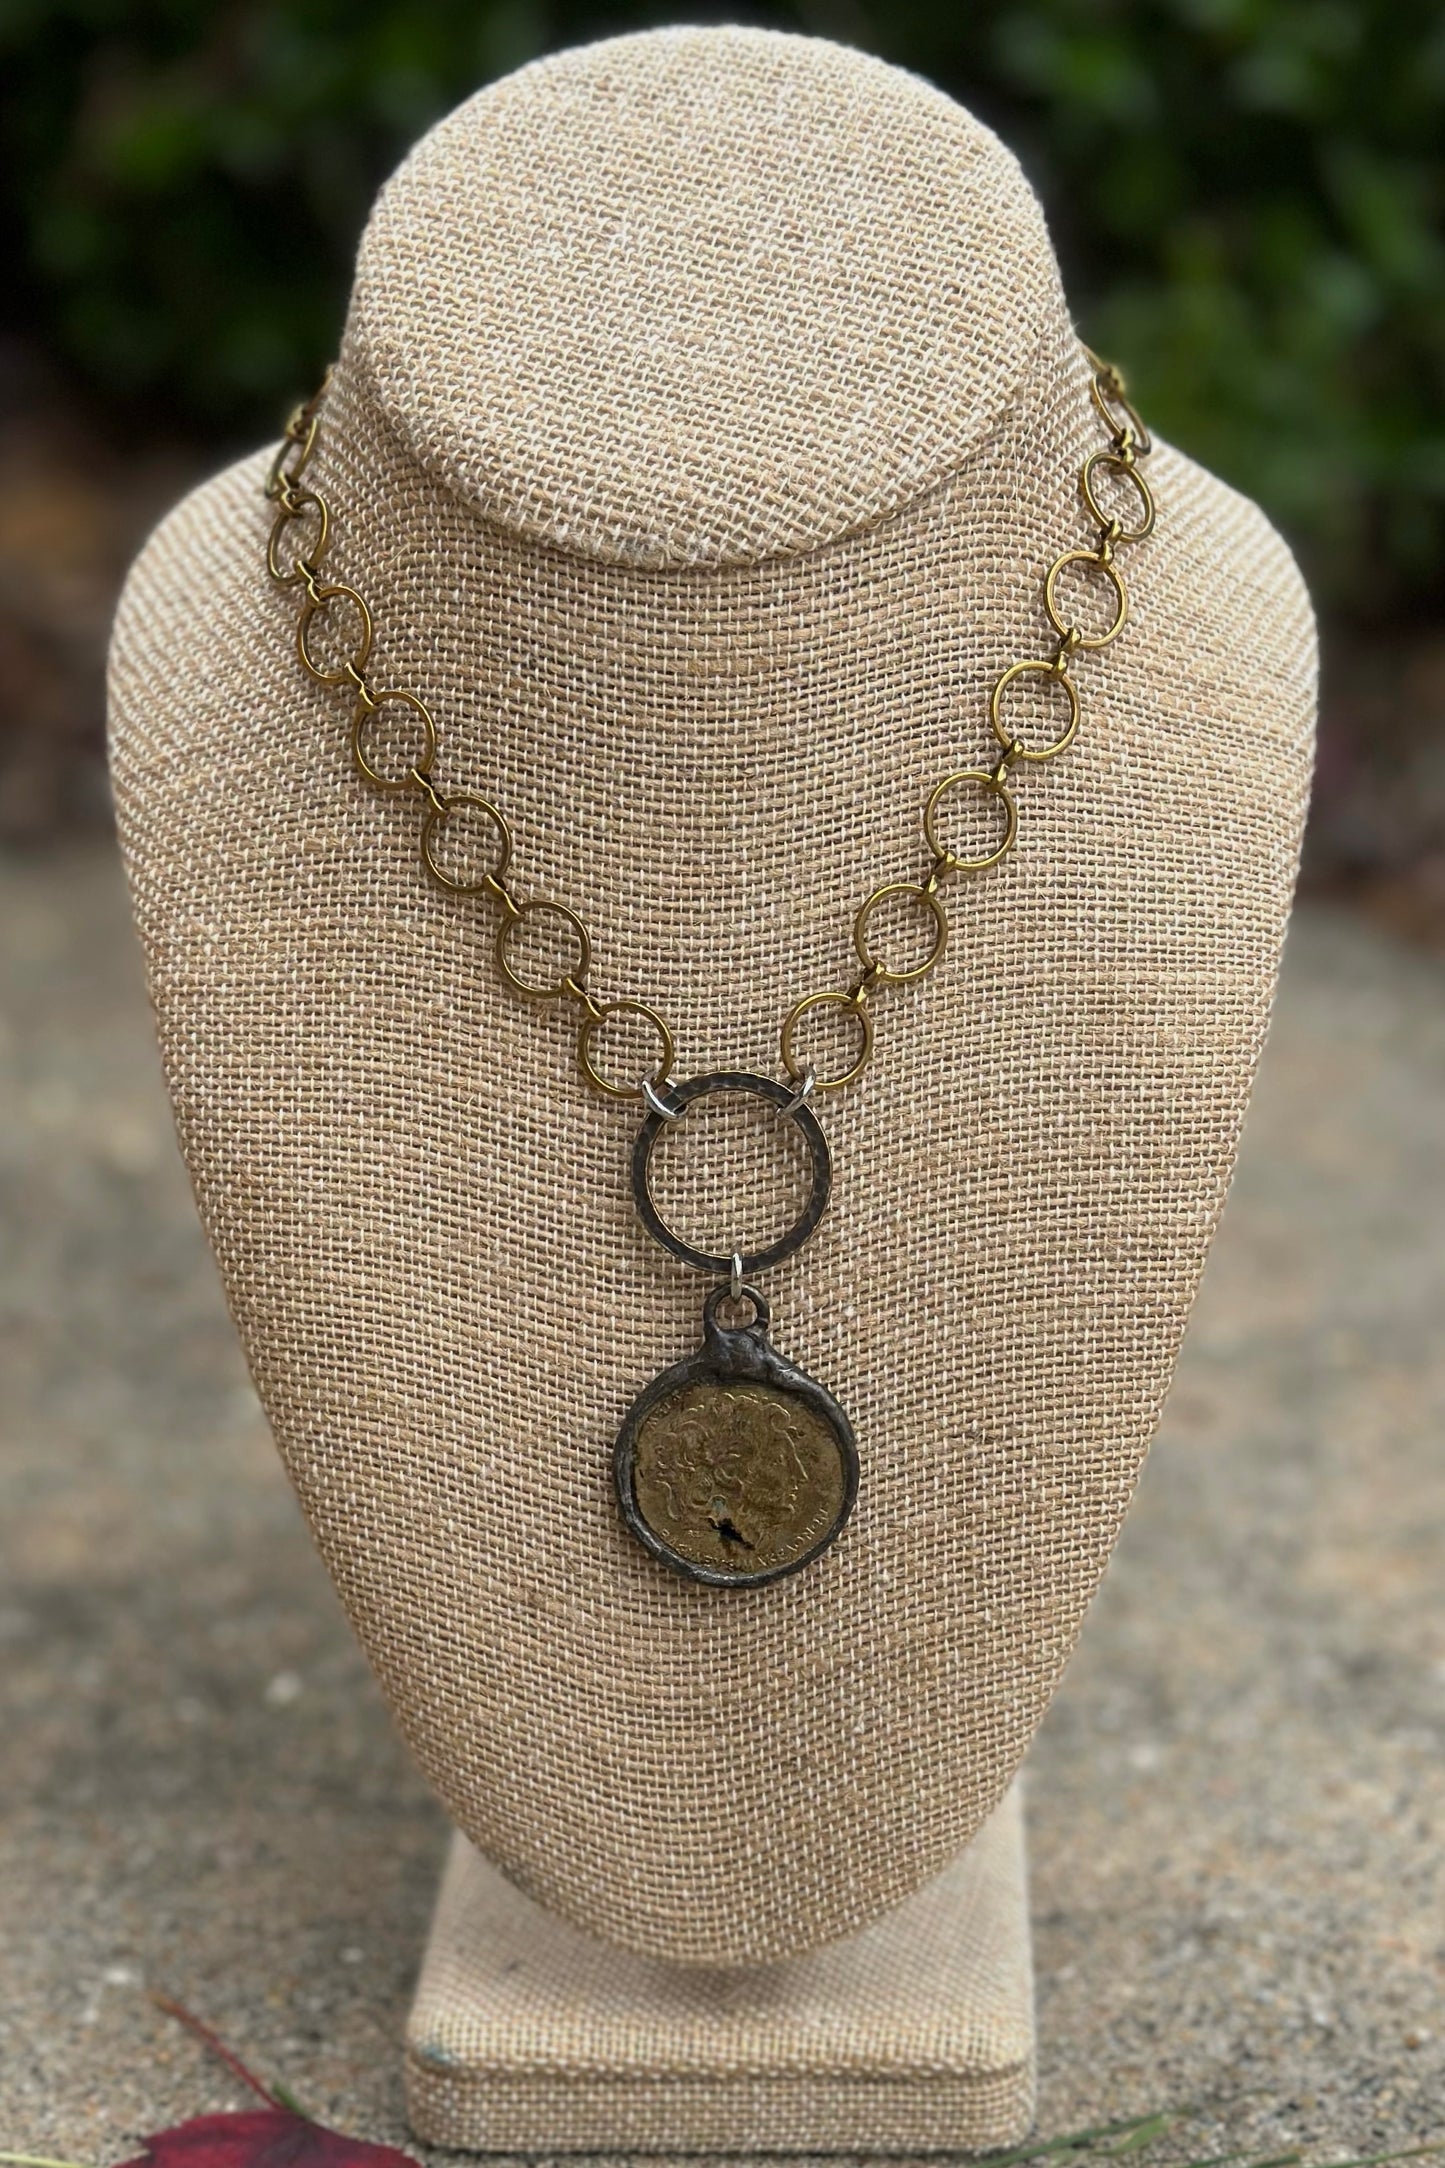 Go Big Chain & Coin Necklace